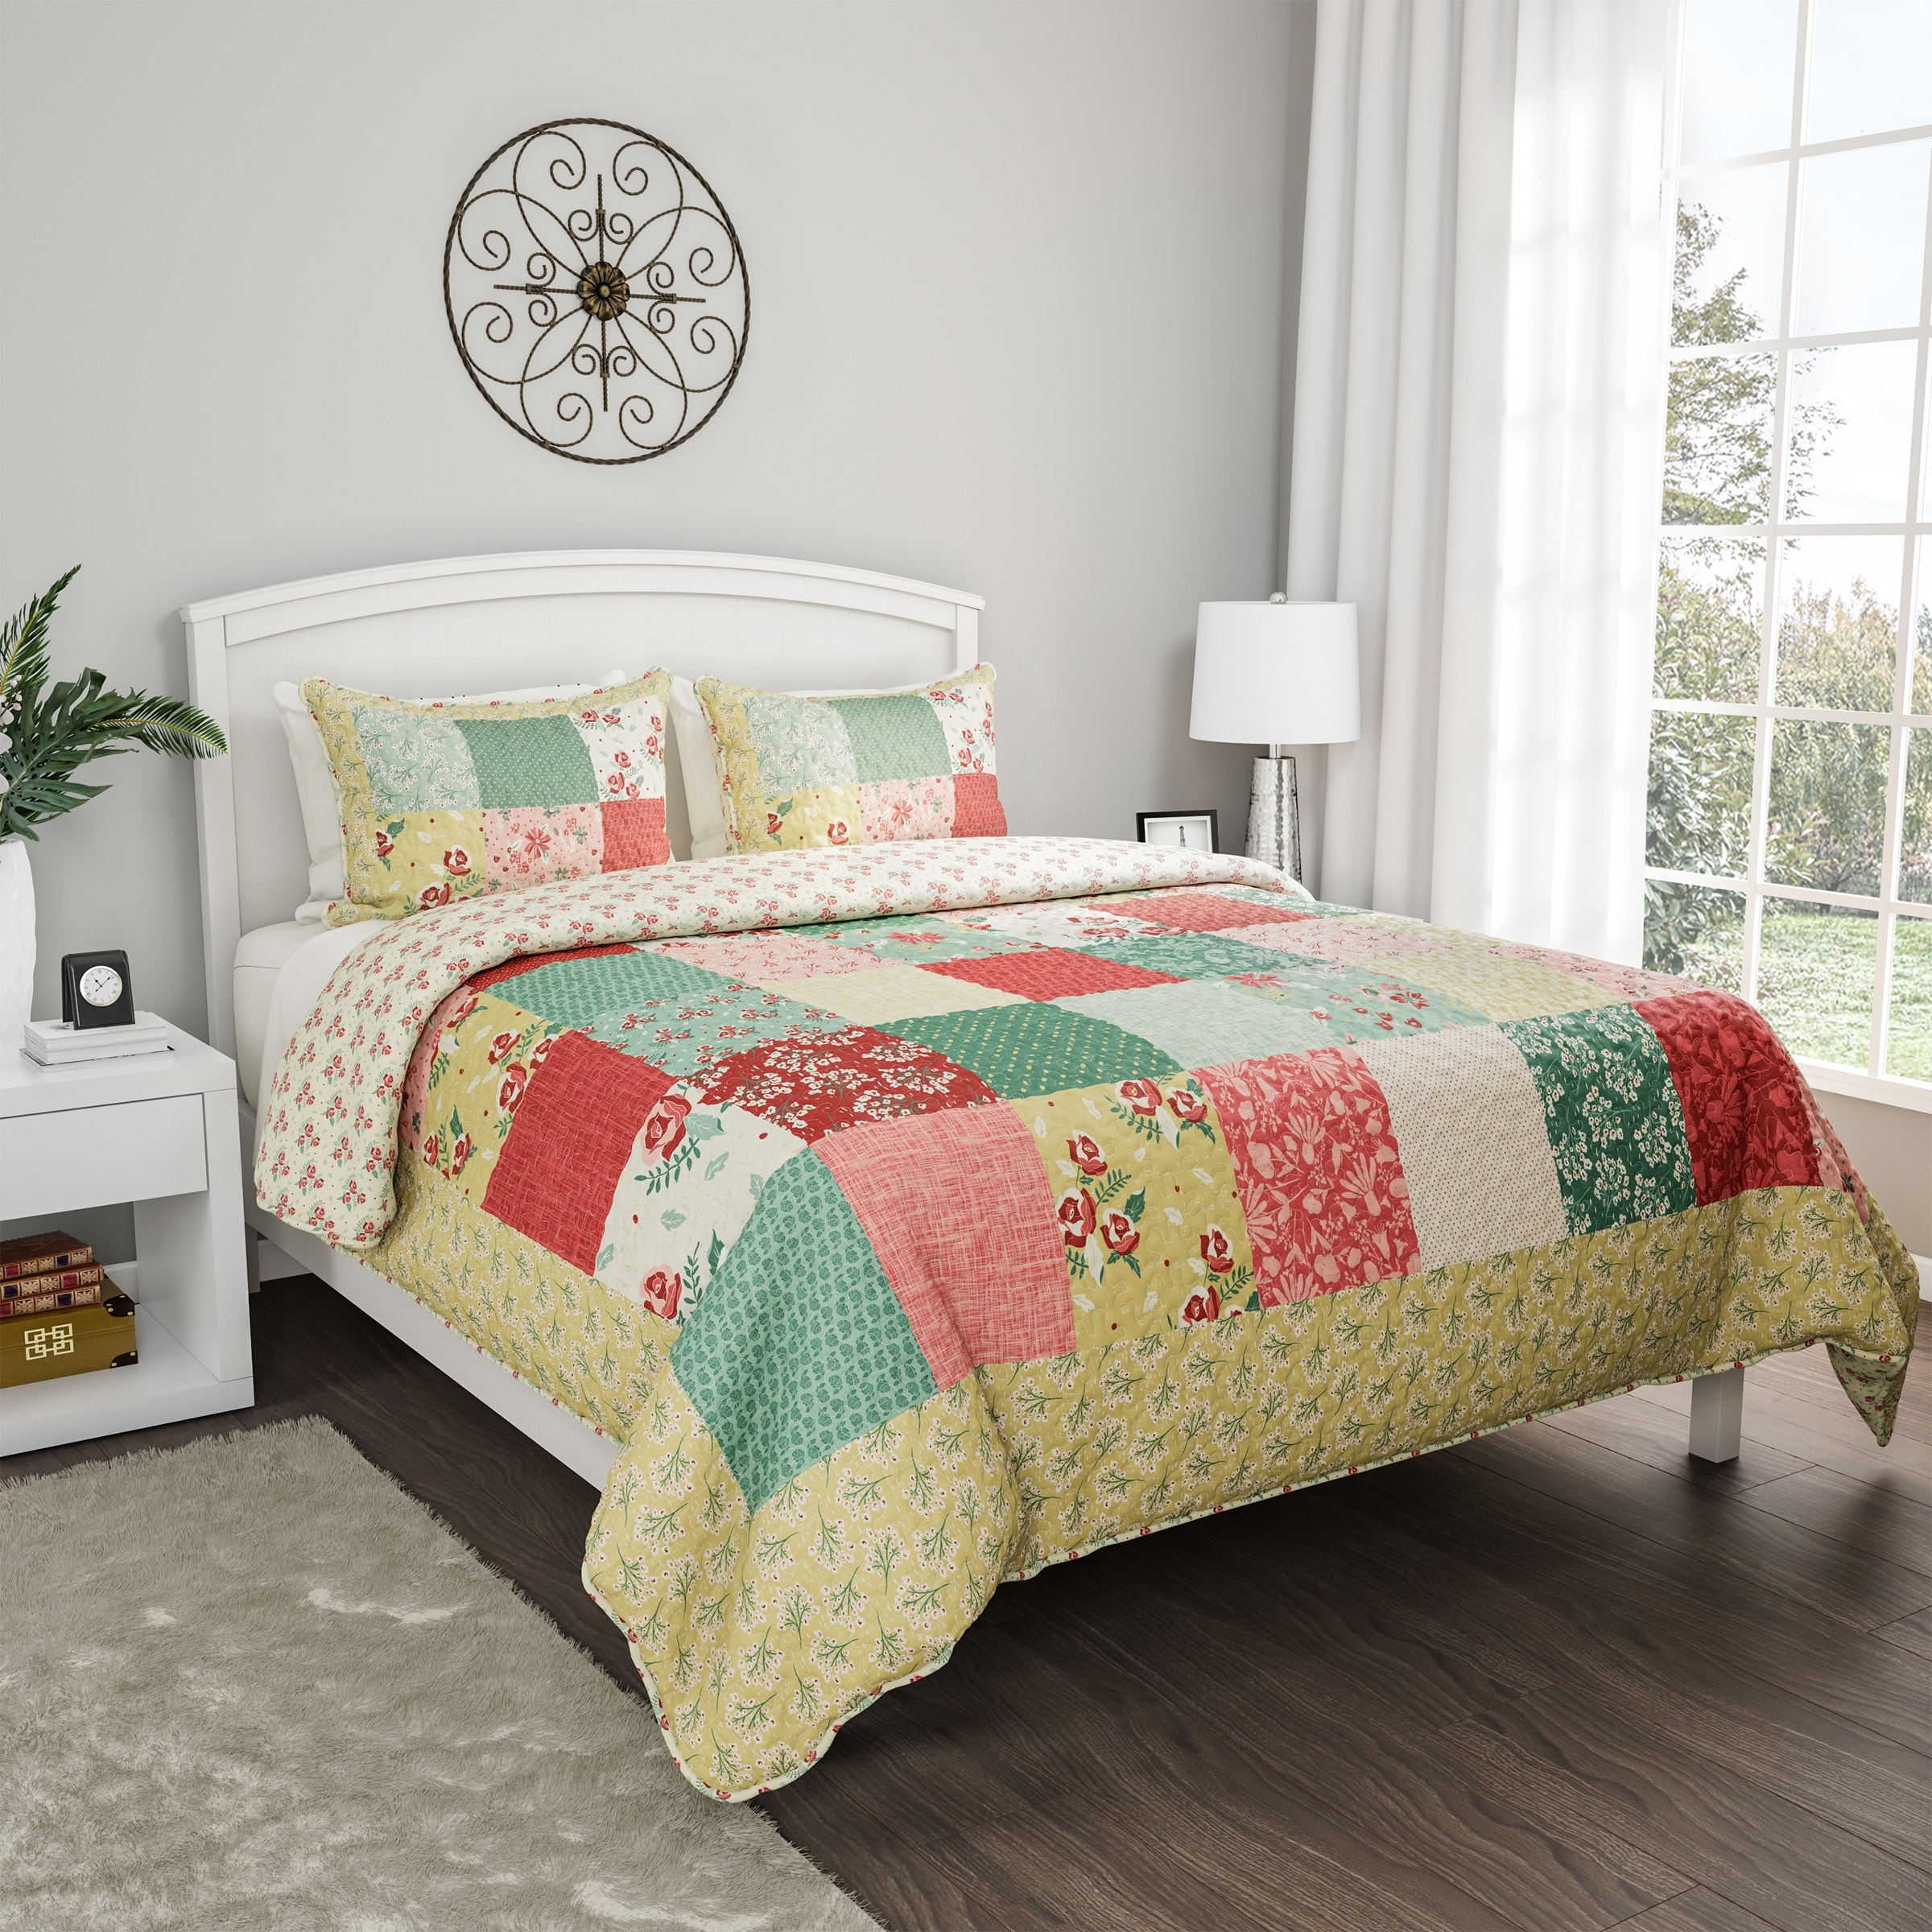 Quilt Bed Set- Hypoallergenic Polyester Microfiber Sweet Dreams Patchwork  Pastel Floral Print with Sham by Windsor Home - On Sale - Bed Bath & Beyond  - 27460519